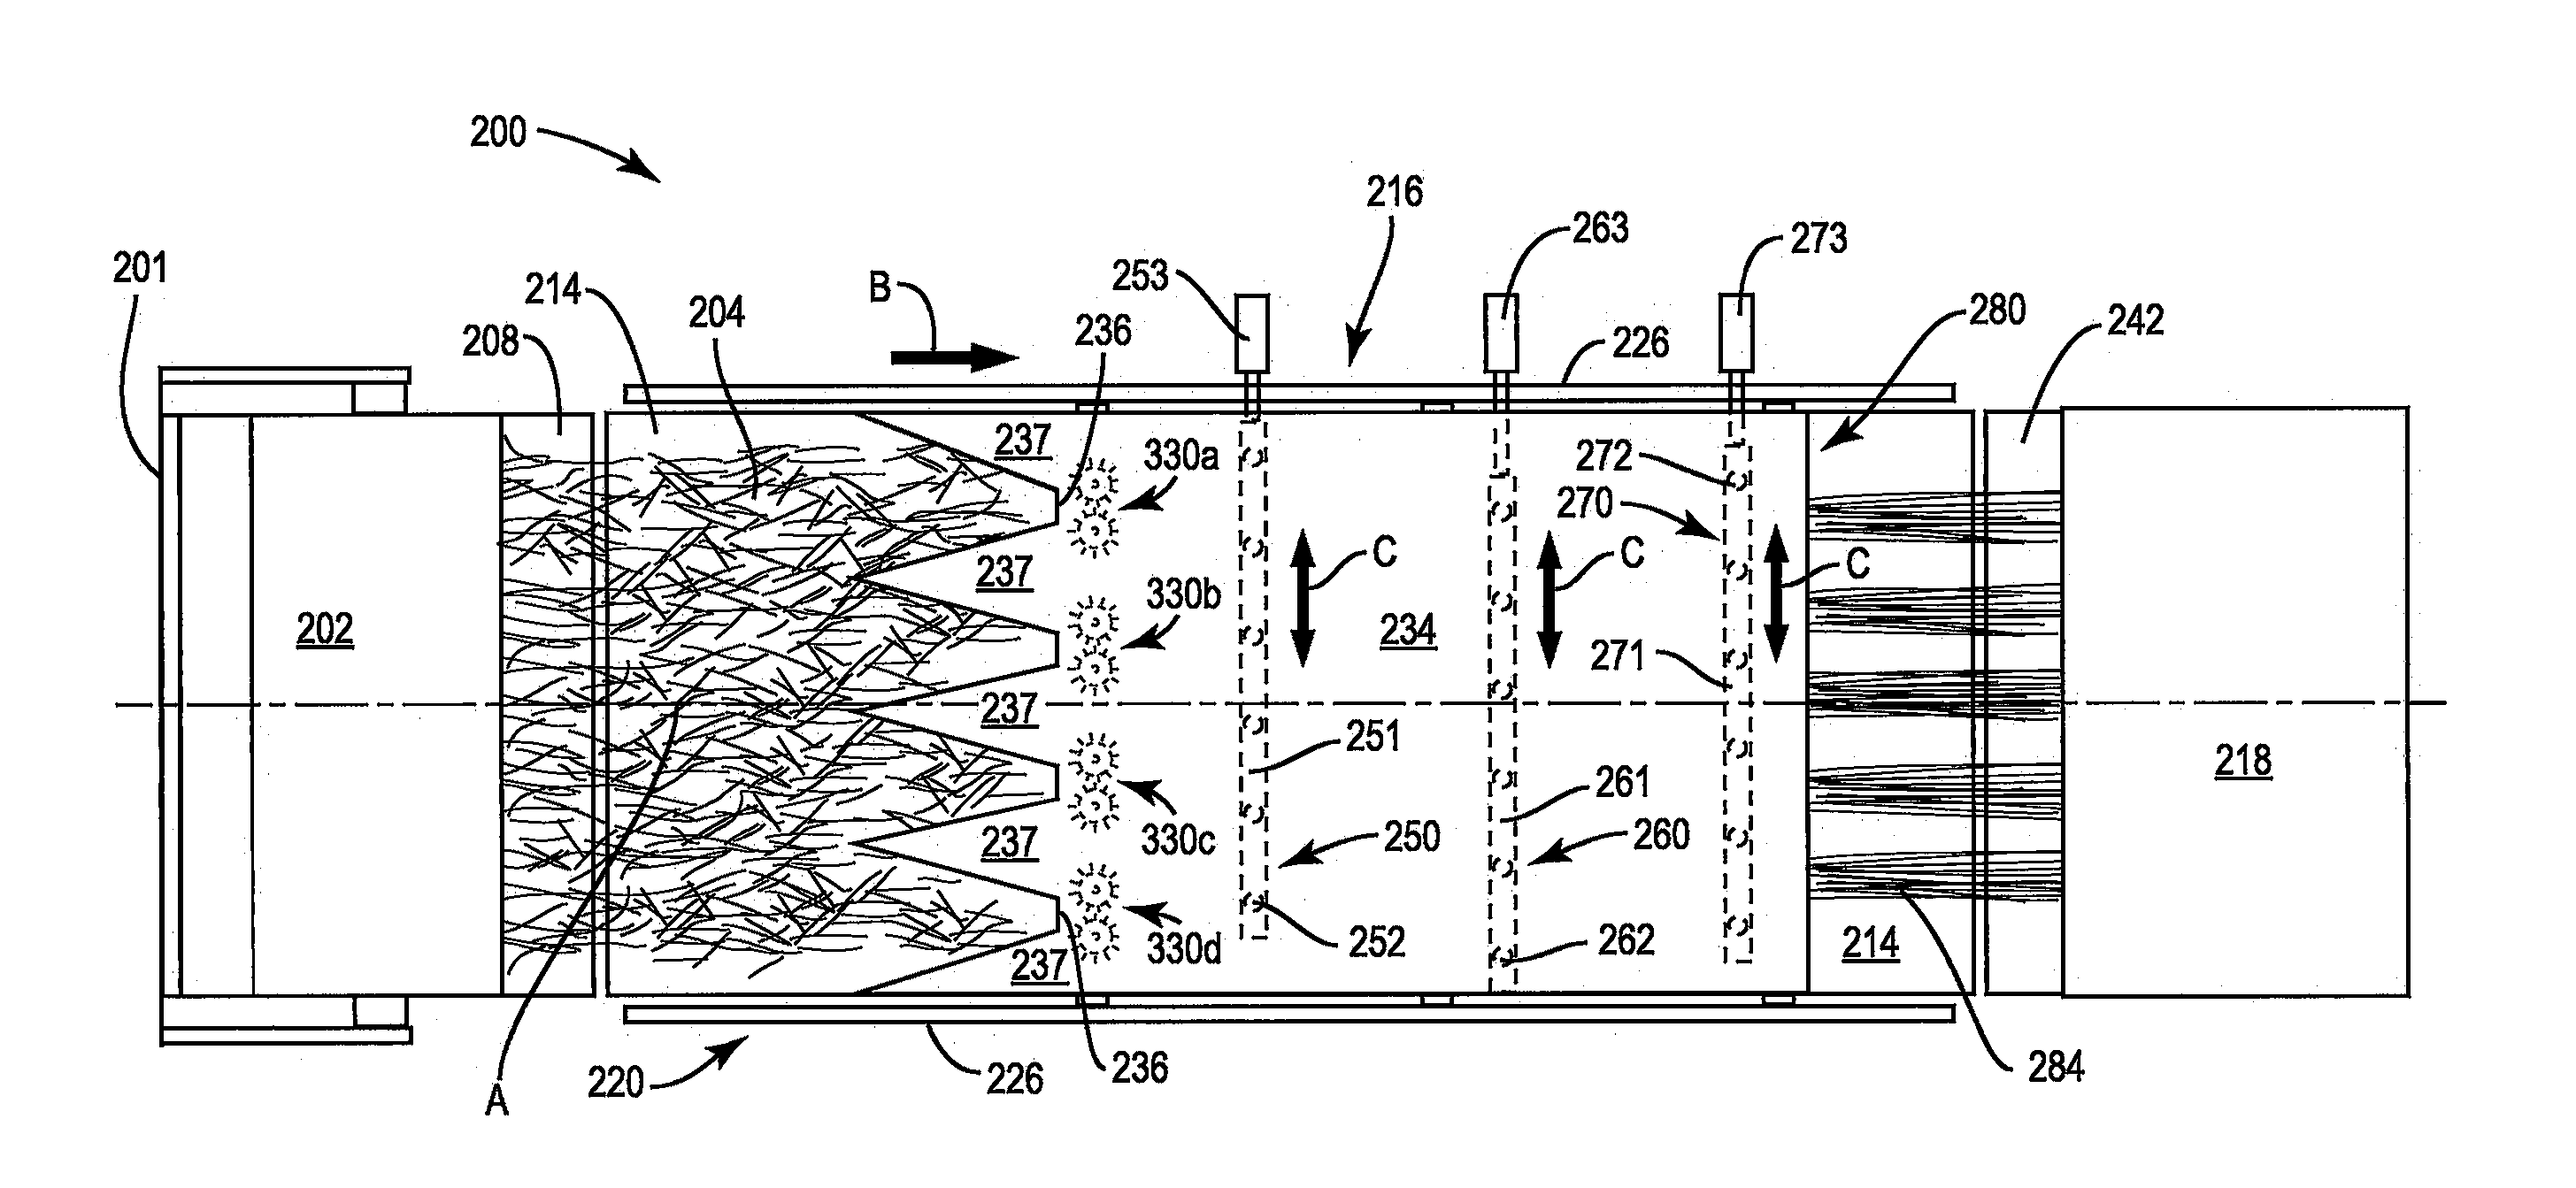 Process and apparatus for orienting bast stalks for decortication